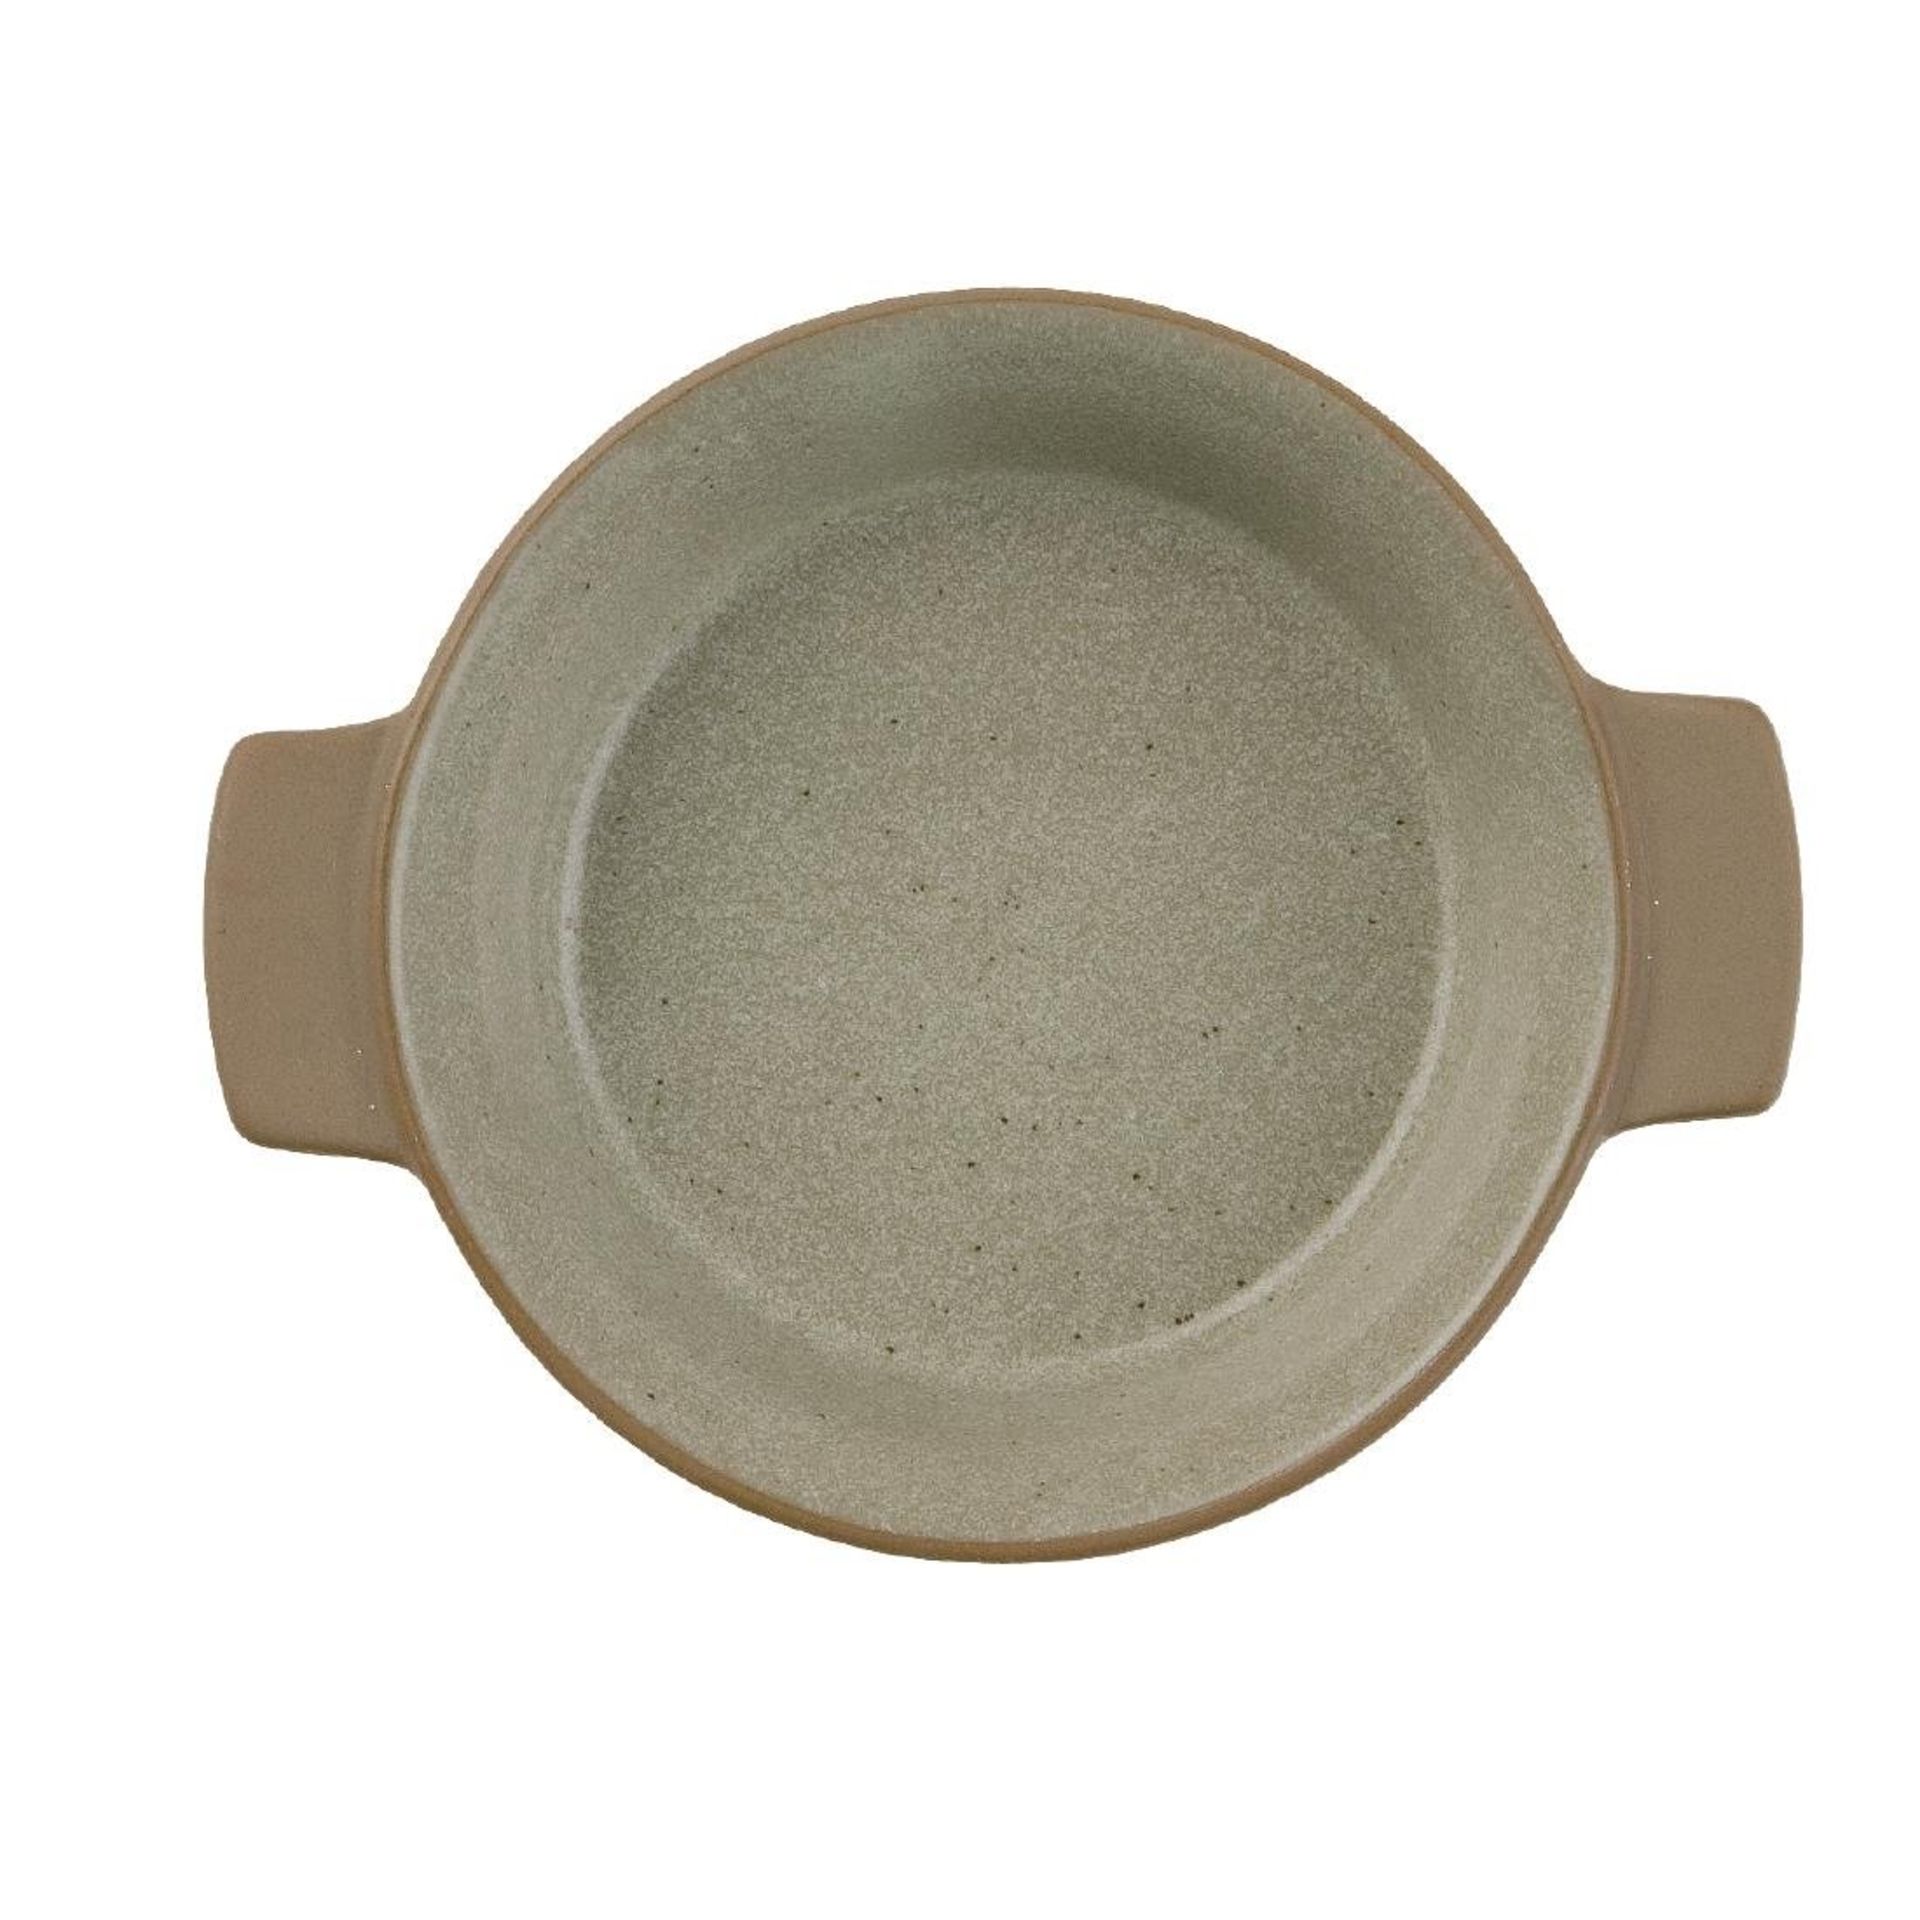 6 X BRAND NEW PACKS OF 6 CHURCHILL IGNEOUS STONEWARE INDIVIDUAL DISHES 170ML RRP £40 PER PACK